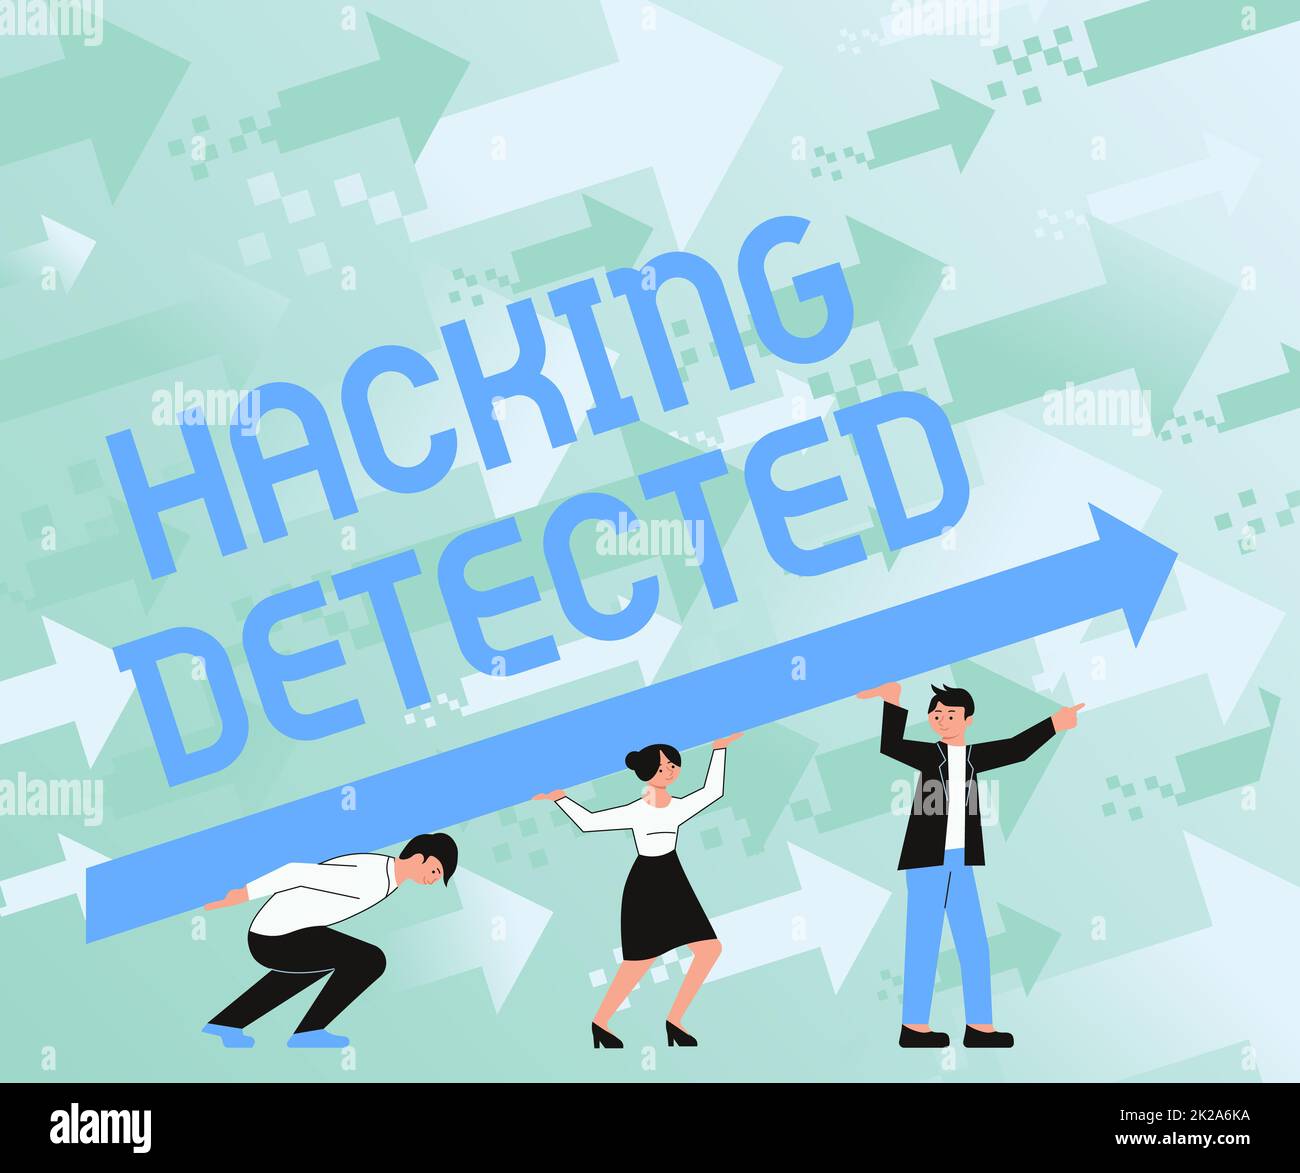 Sign displaying Hacking Detected. Word Written on identify the presence or unauthorized access to data Four Colleagues Drawing Standing Holding Large Arrow For Success. Stock Photo